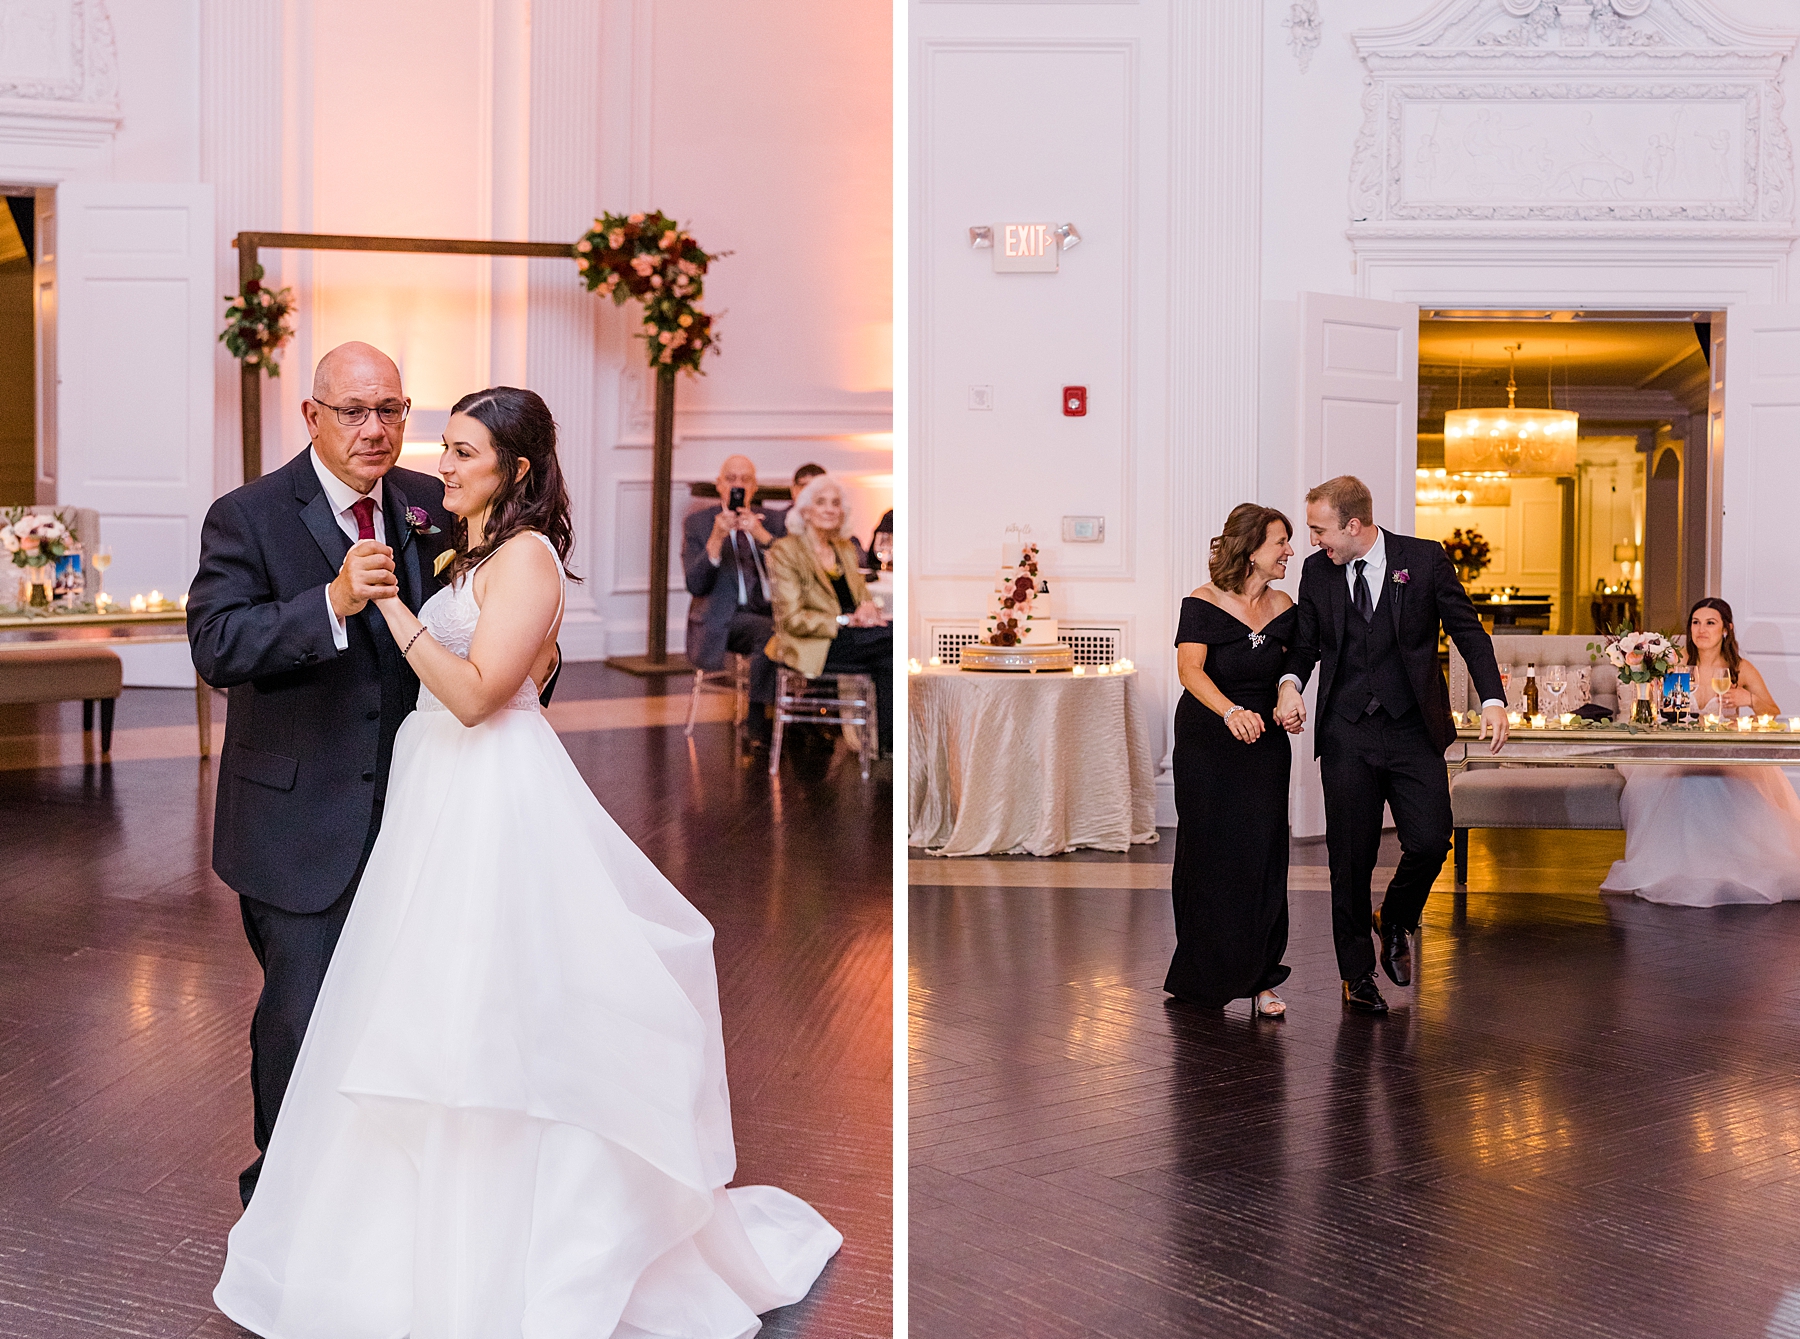 father-daughter dance